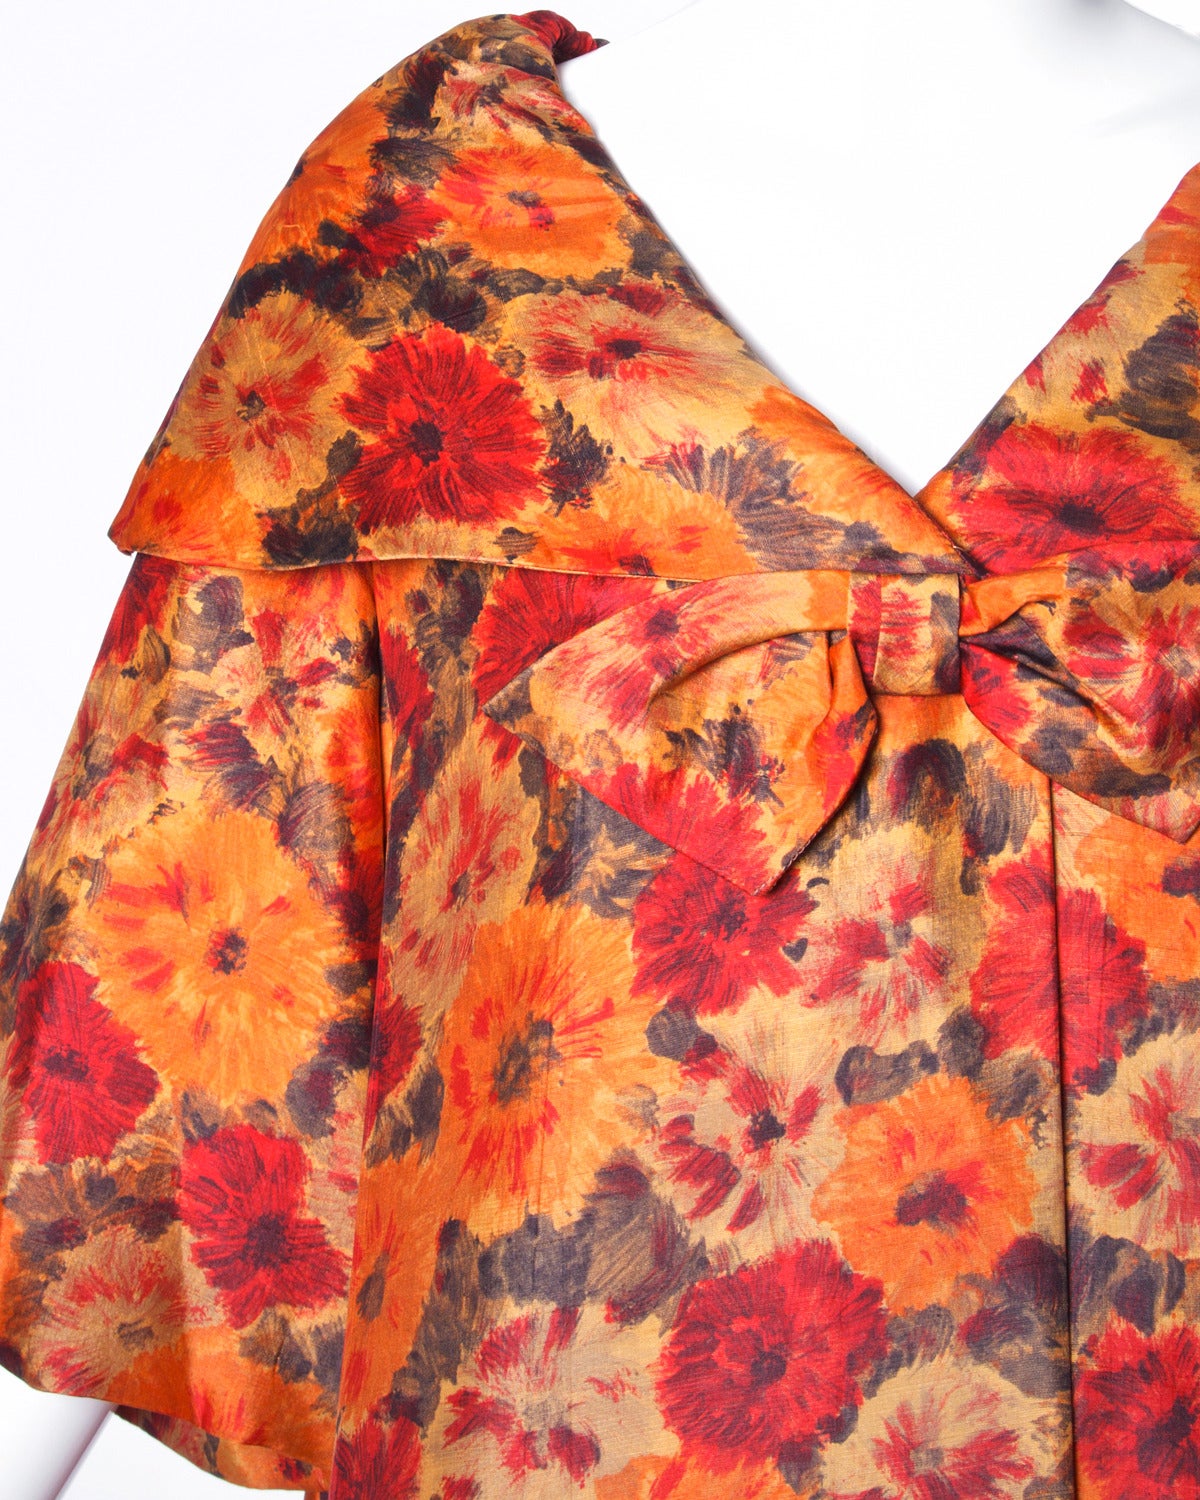 Floral printed silk swing coat with bell sleeves and a full sweep by Sandra Sage. Oversized bow detail and giant pop-up collar.

Details: 

Fully Lined
Front Button and Hook Closure
Estimated Size: Free (Small-Large)
Color: Orange/ Red/